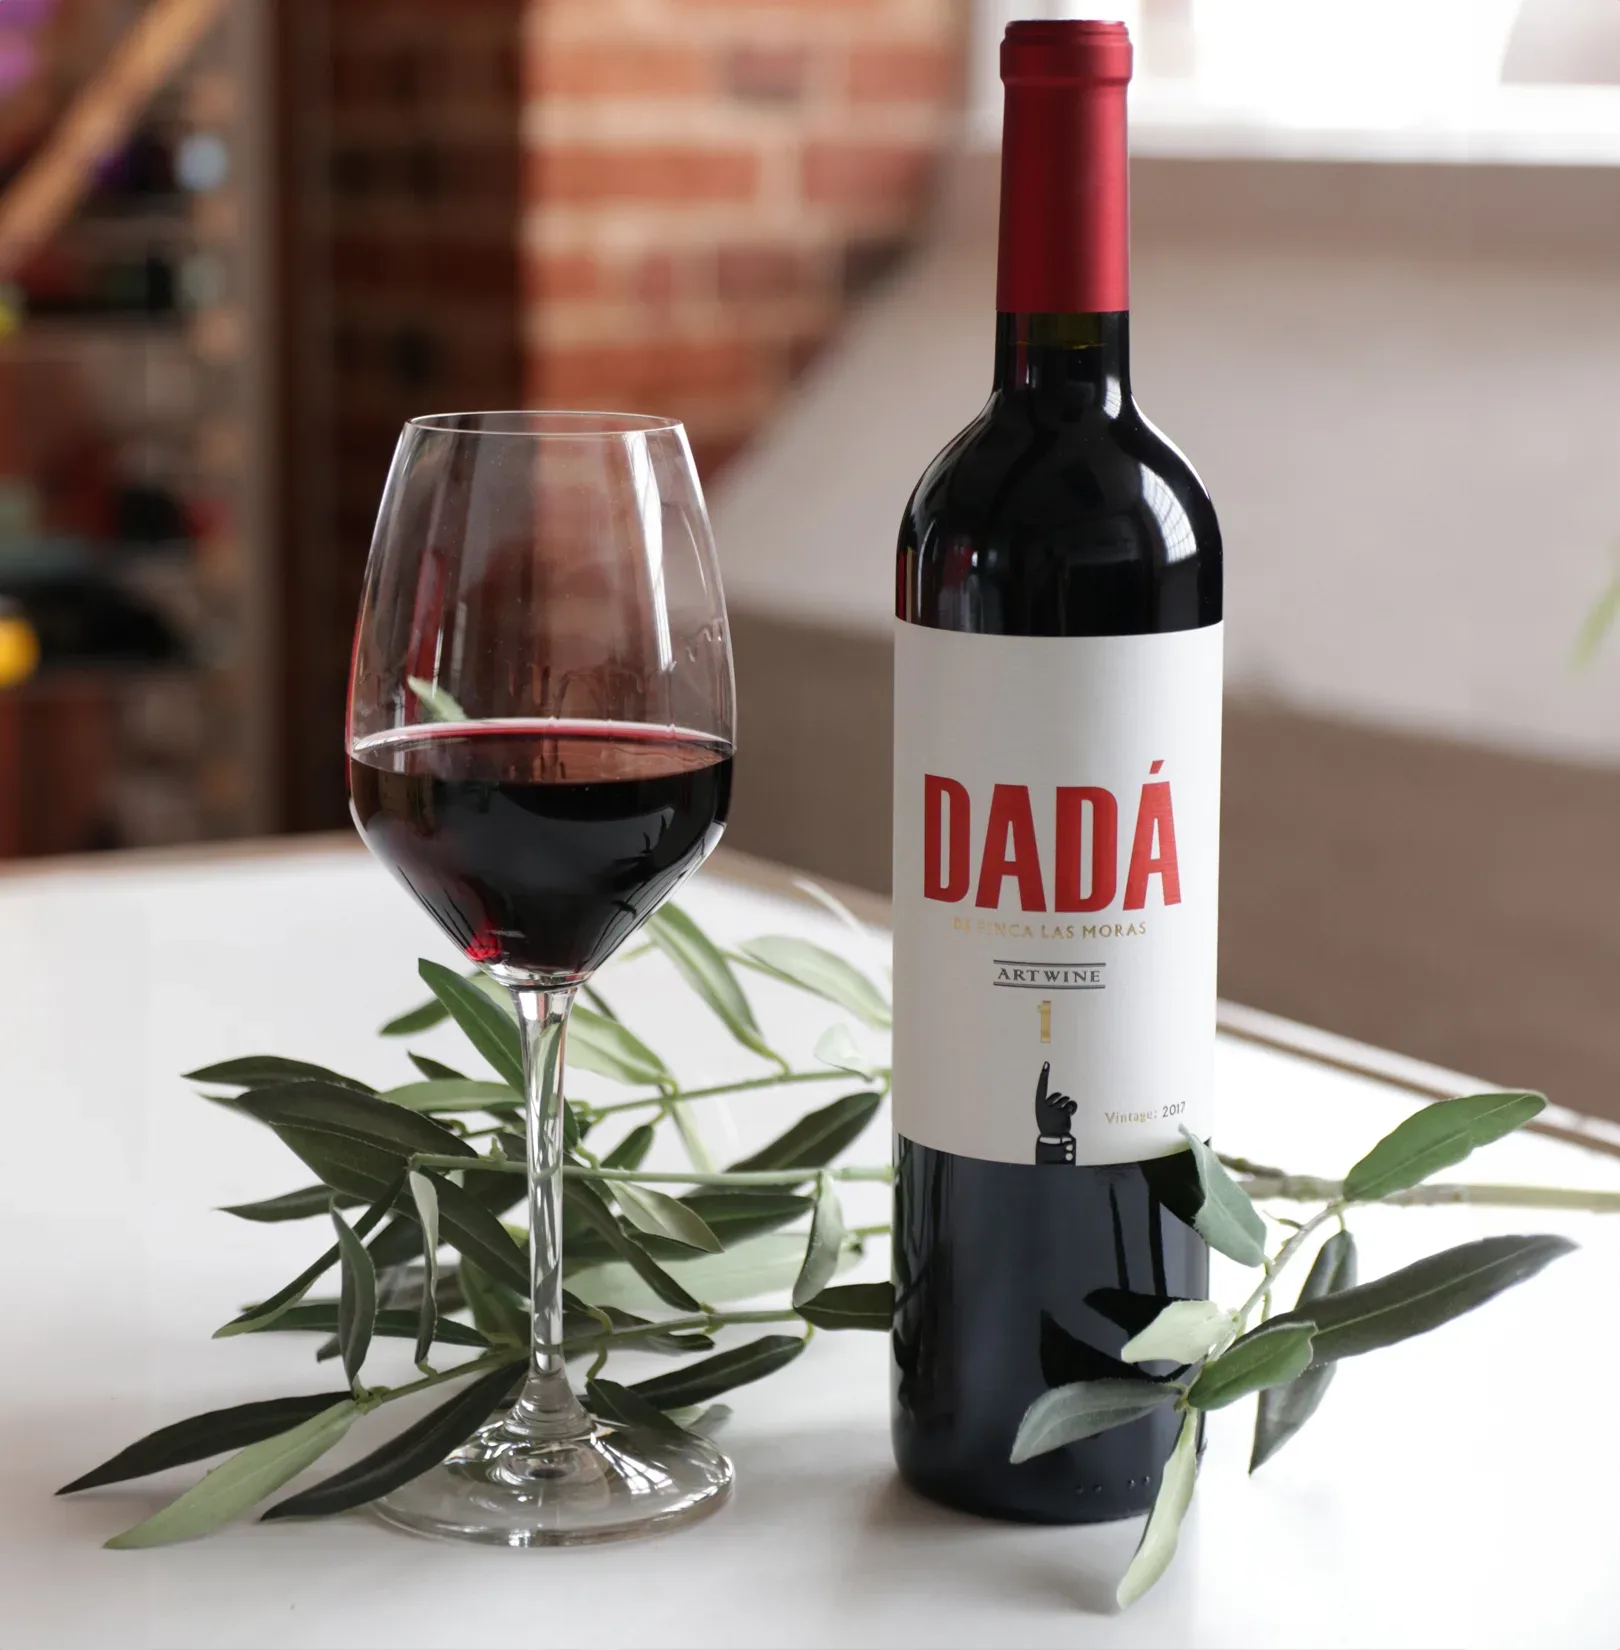 dada wine bottle and glass on a table with some leaves